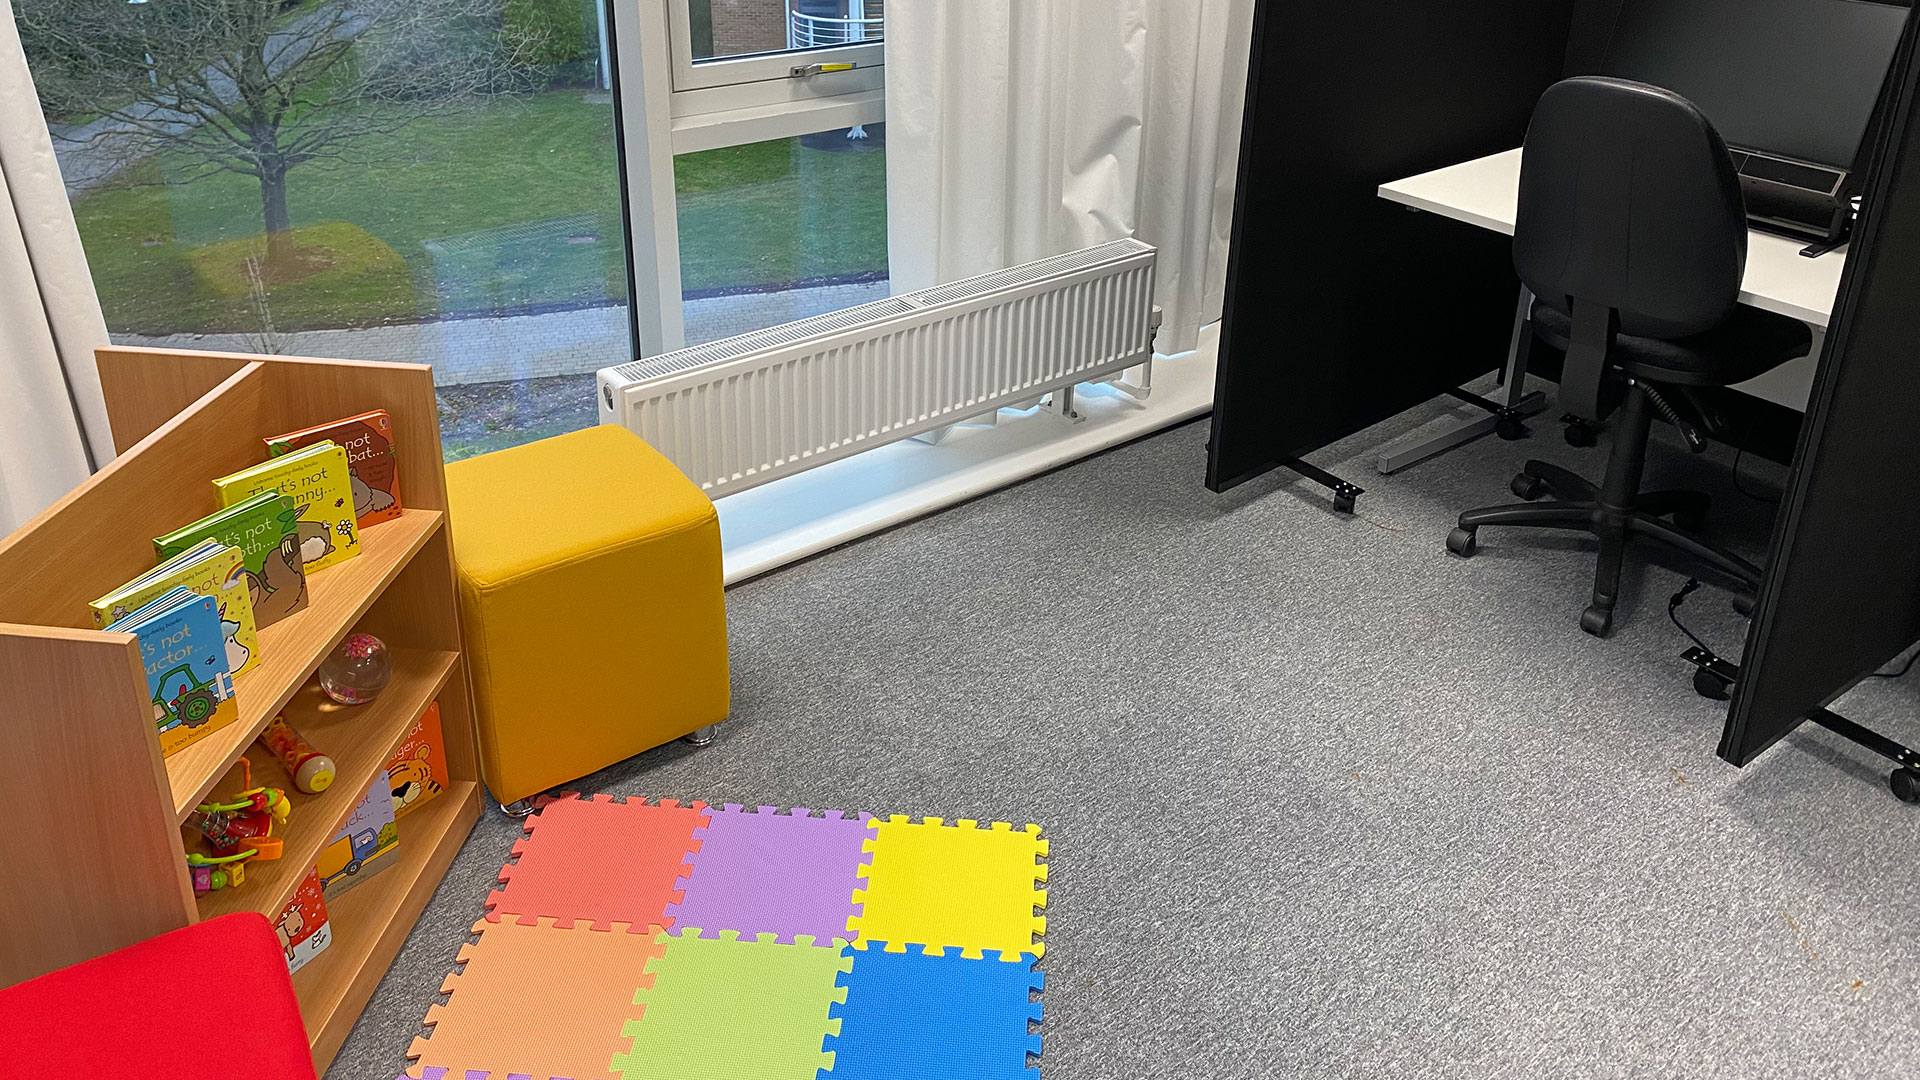 On-campus BabyLab room. There are two colourful stools at either side of a children's bookshelf. There is a child's soft play mat on the floor. To the right of the room there is a single person desk with a computer on it.